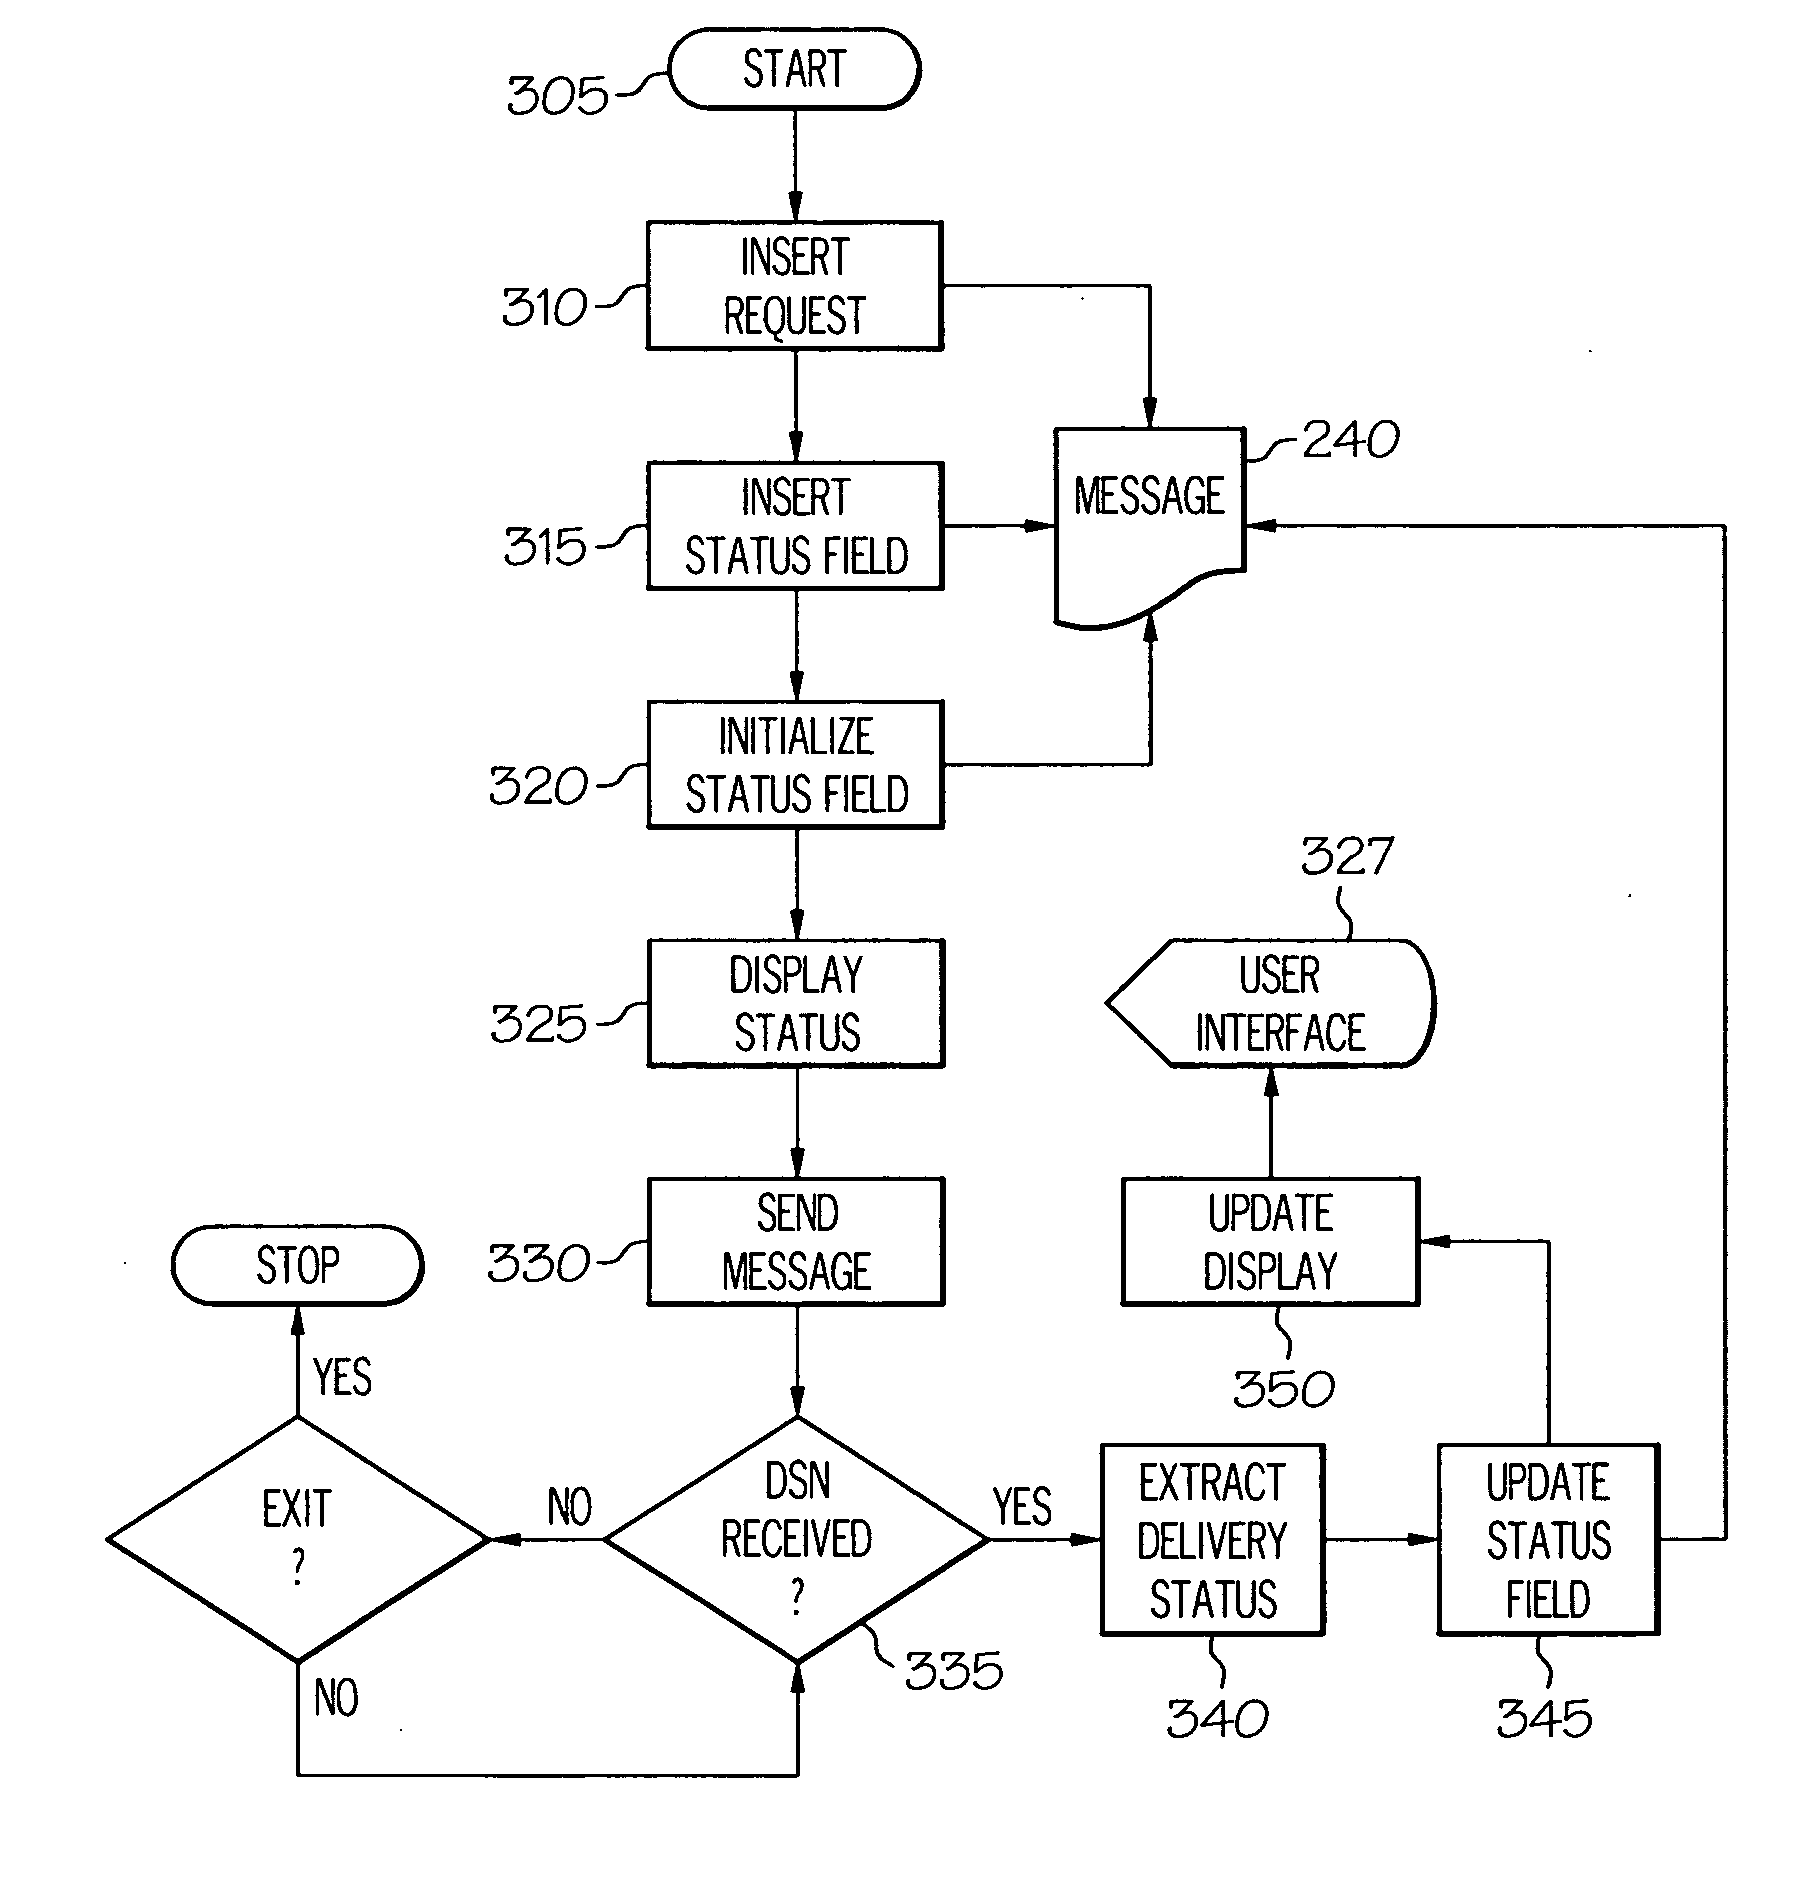 System and process for delivery status notification